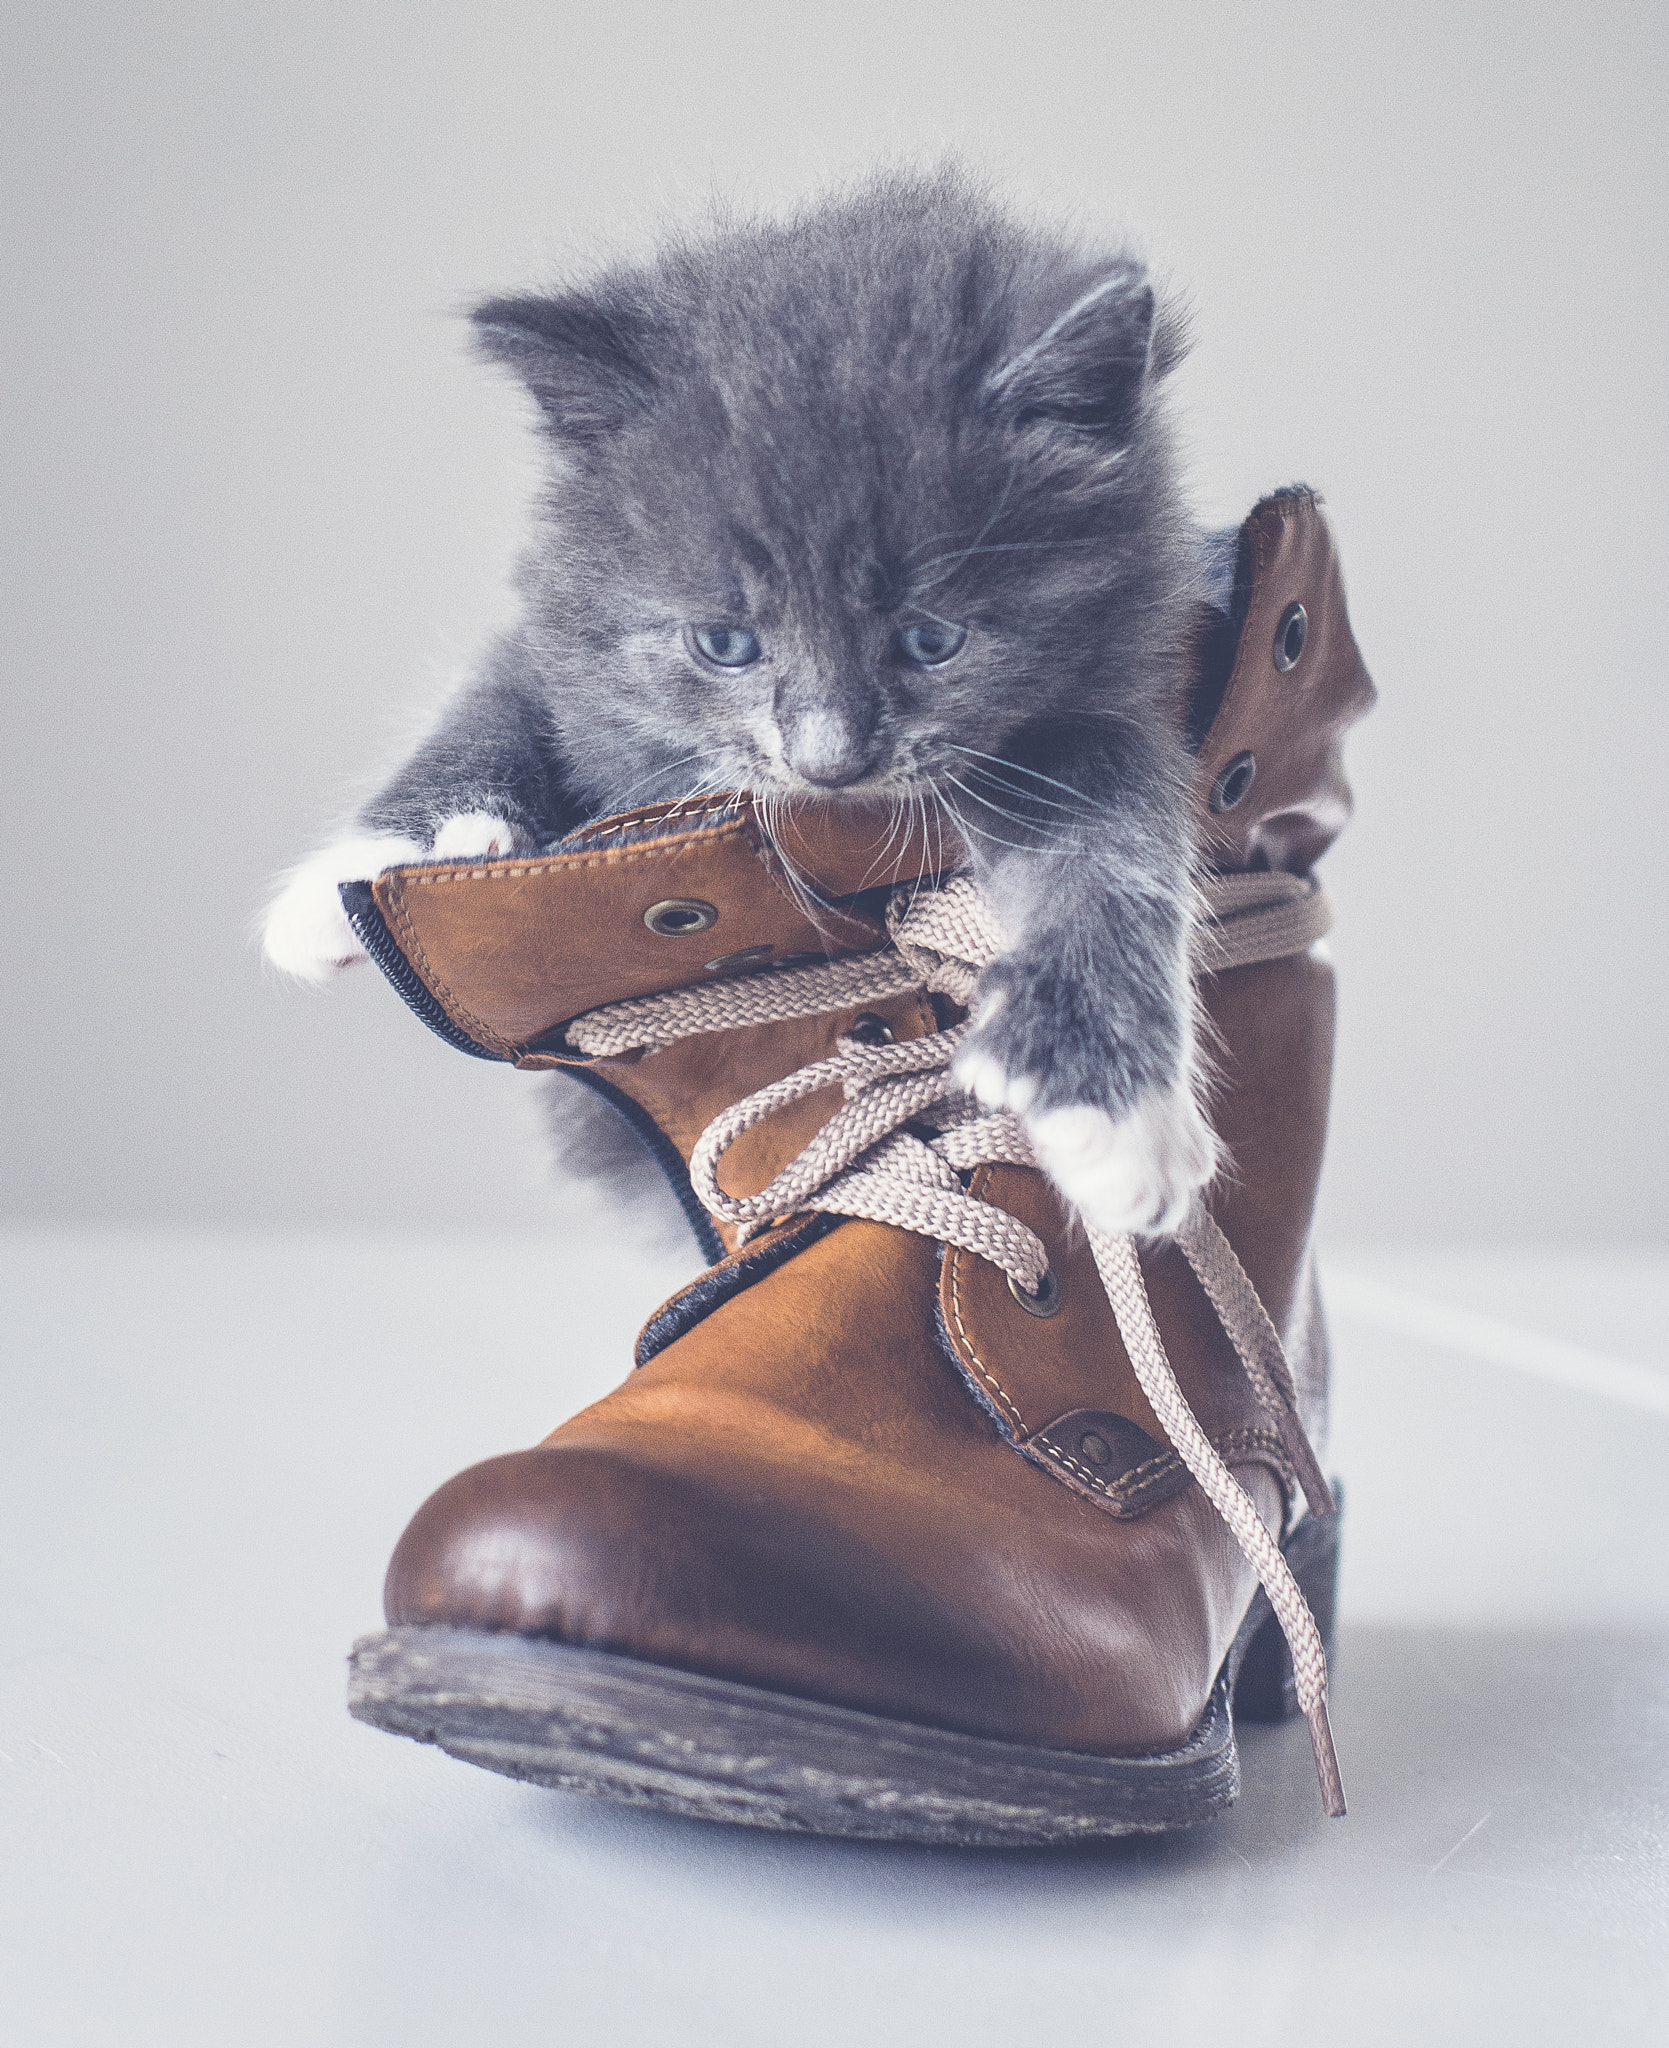 Pentax K-5 II sample photo. Puss in a boot photography